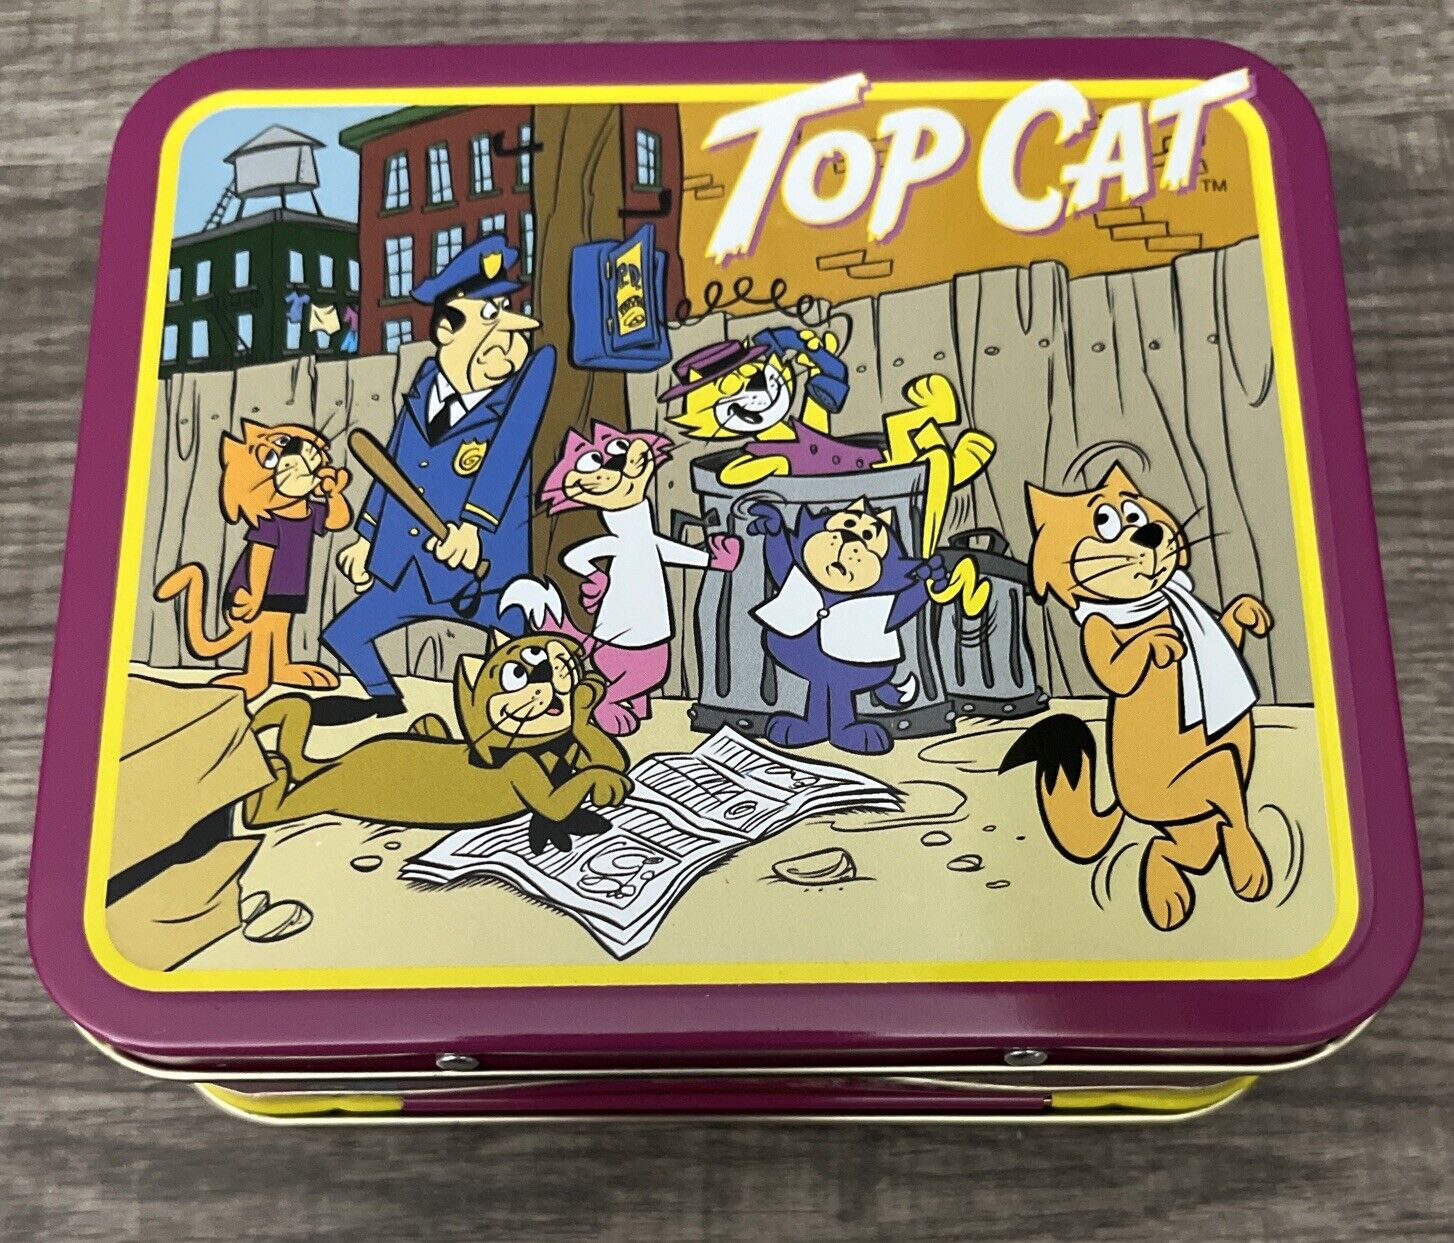 1999 TOP CAT Tin Lunch Box Limited Edition Collector’s Tin Nostalgic Lunchbox